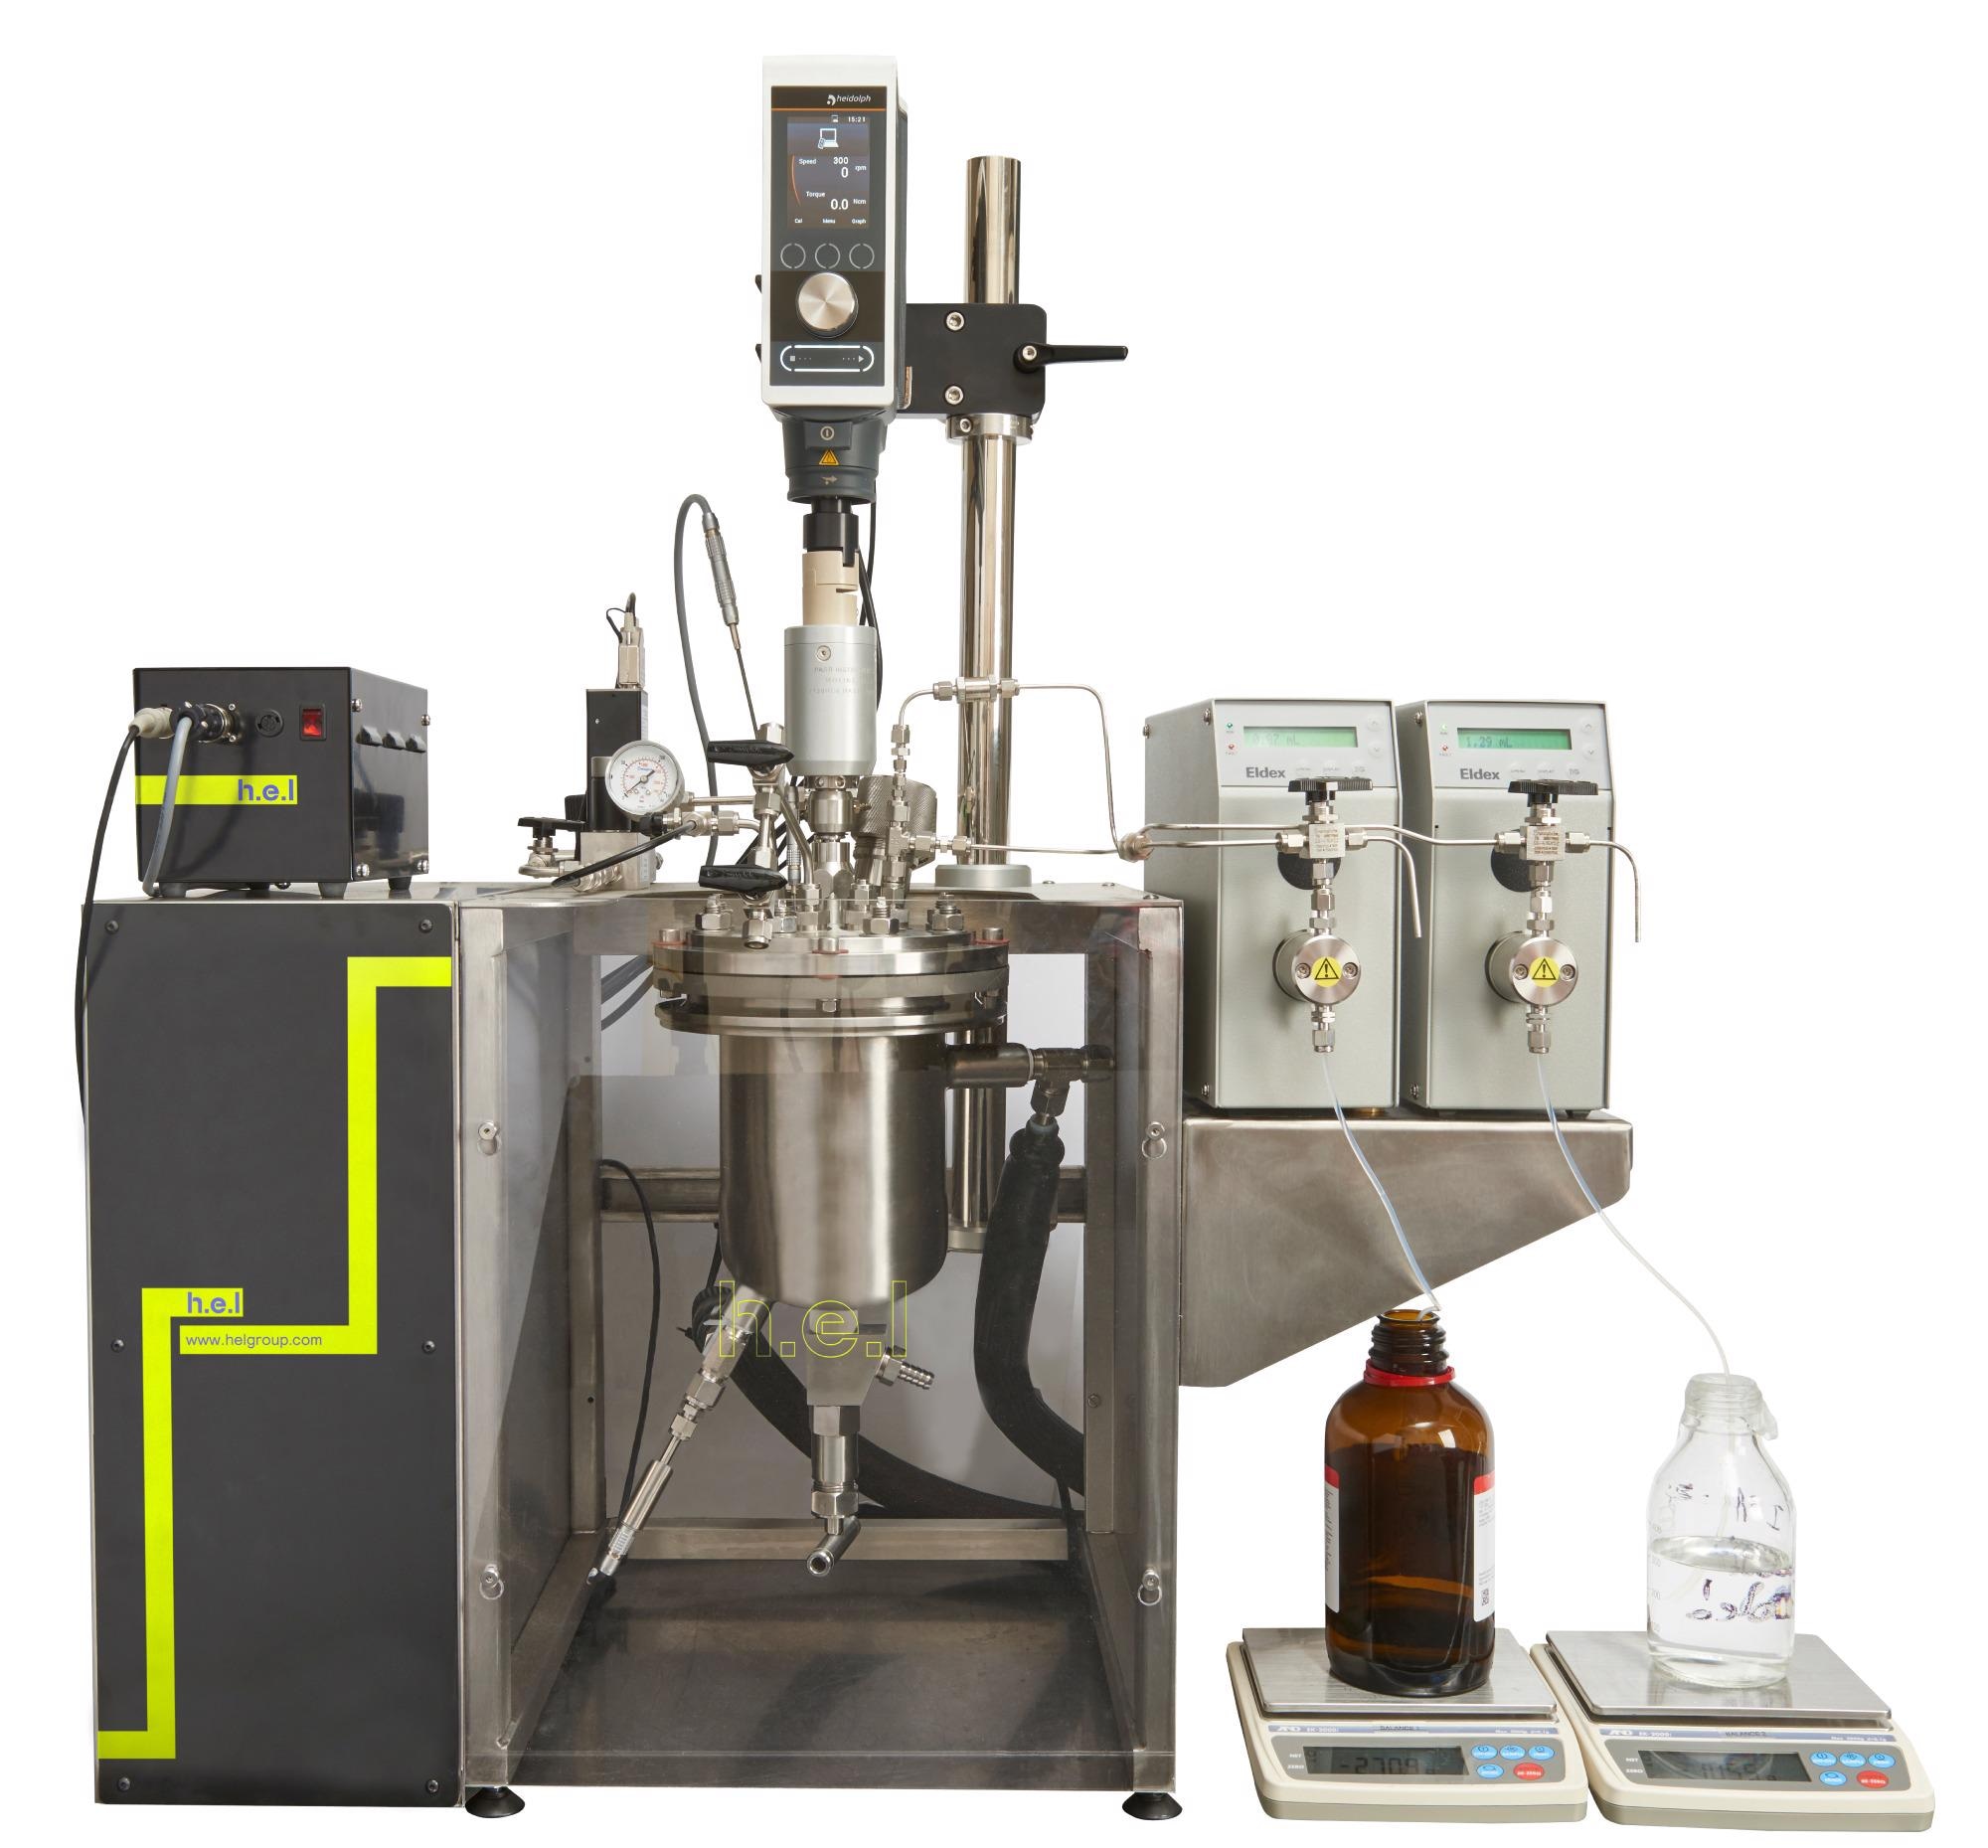 AutoLAB High Pressure: A High Pressure Automated Reactor System